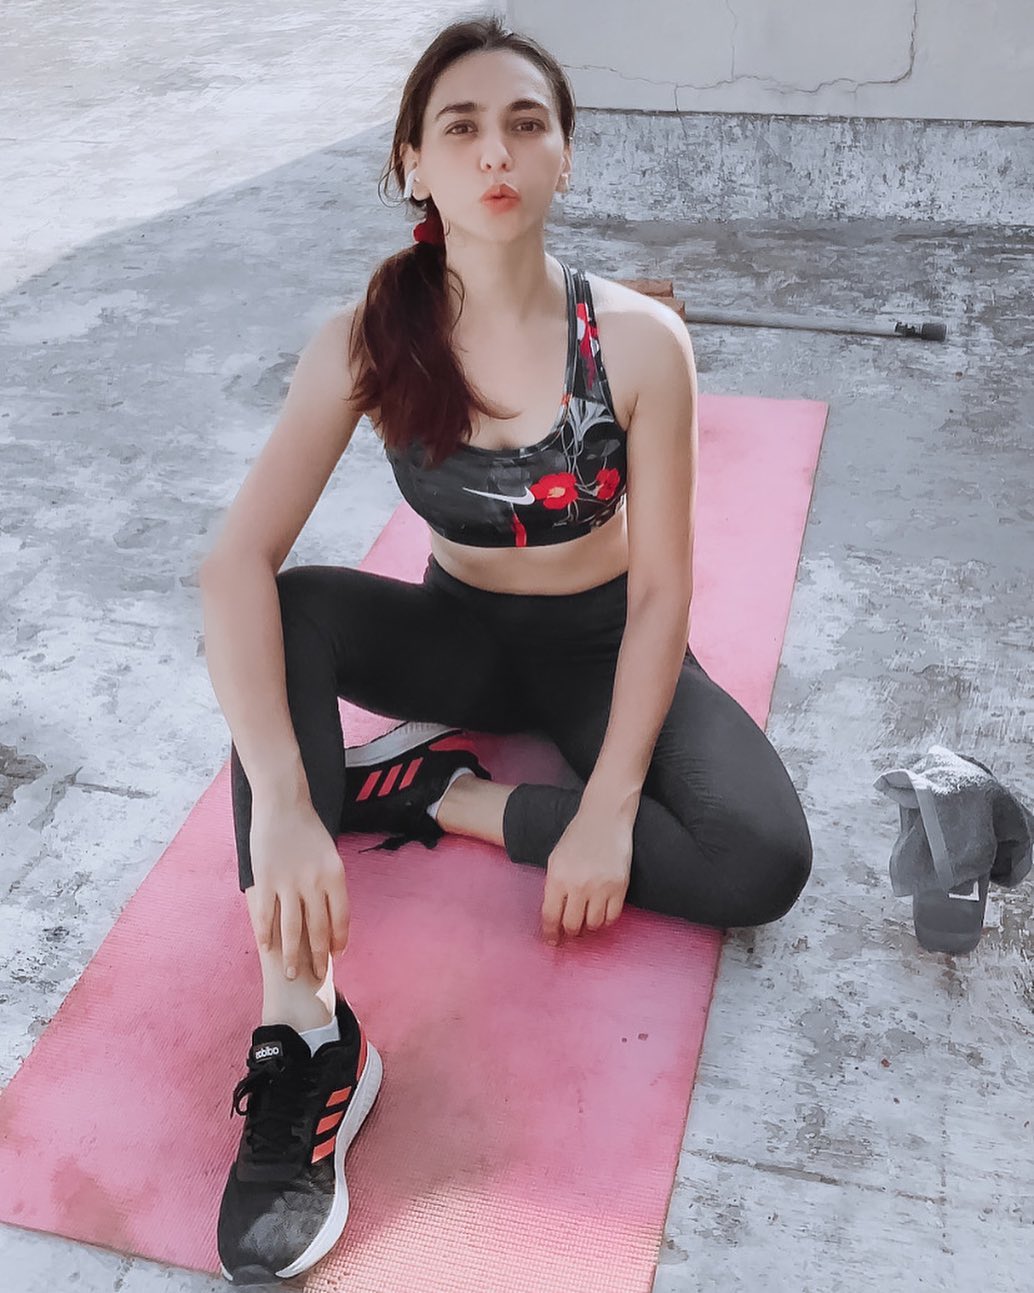 Working out early in the morning is the best tip for everyday fitness: Priya Bathija